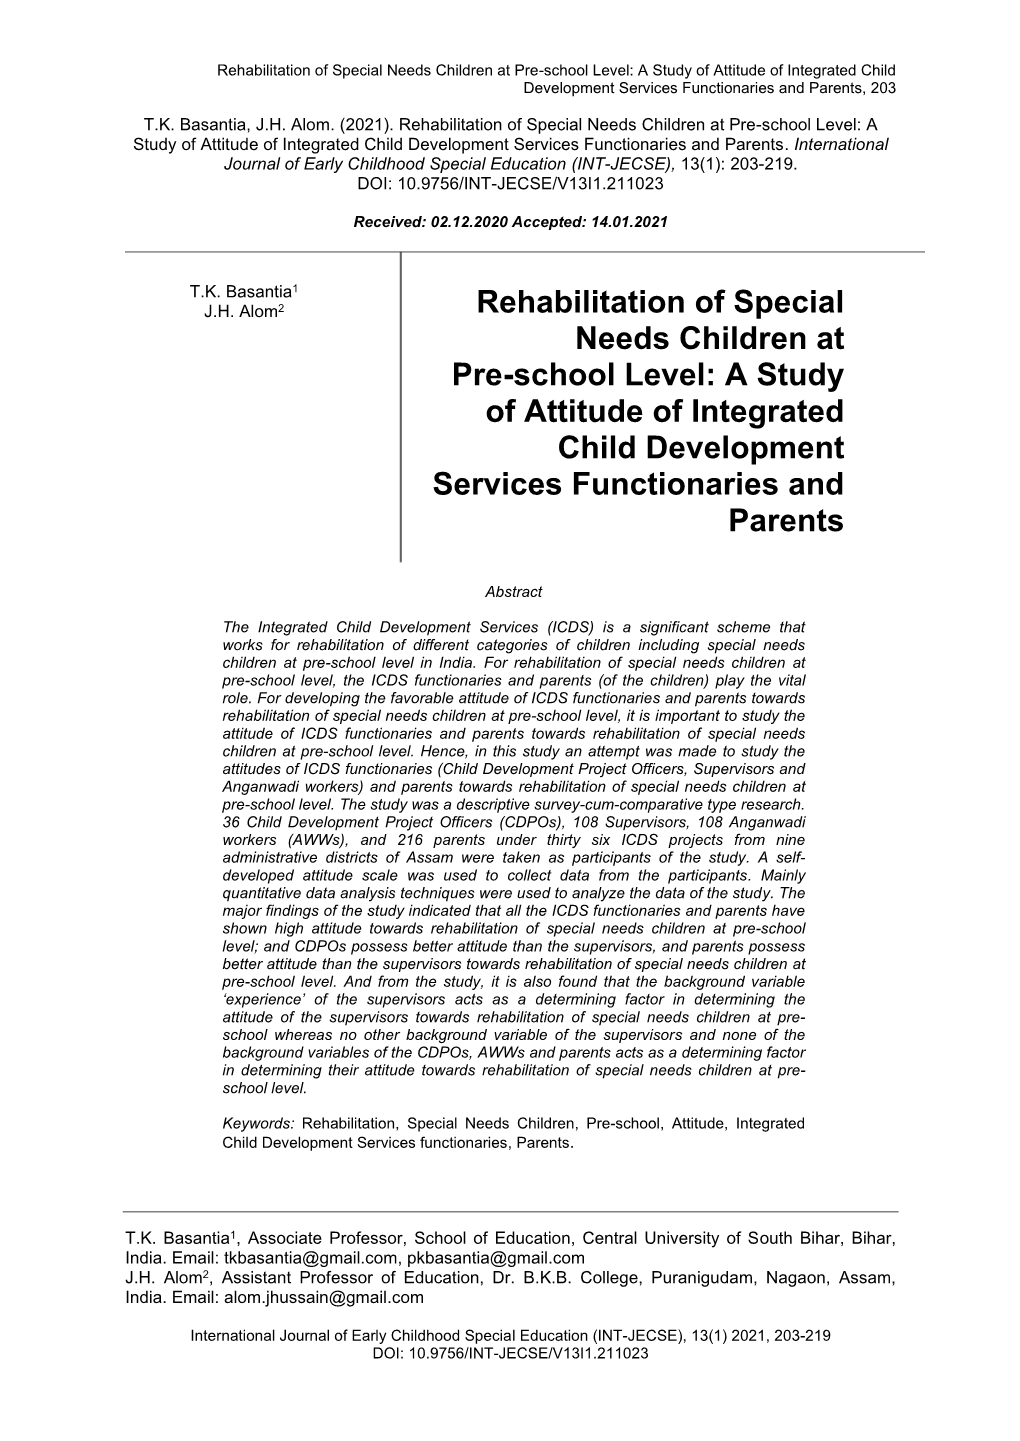 Rehabilitation of Special Needs Children at Pre-School Level: a Study of Attitude of Integrated Child Development Services Functionaries and Parents, 203